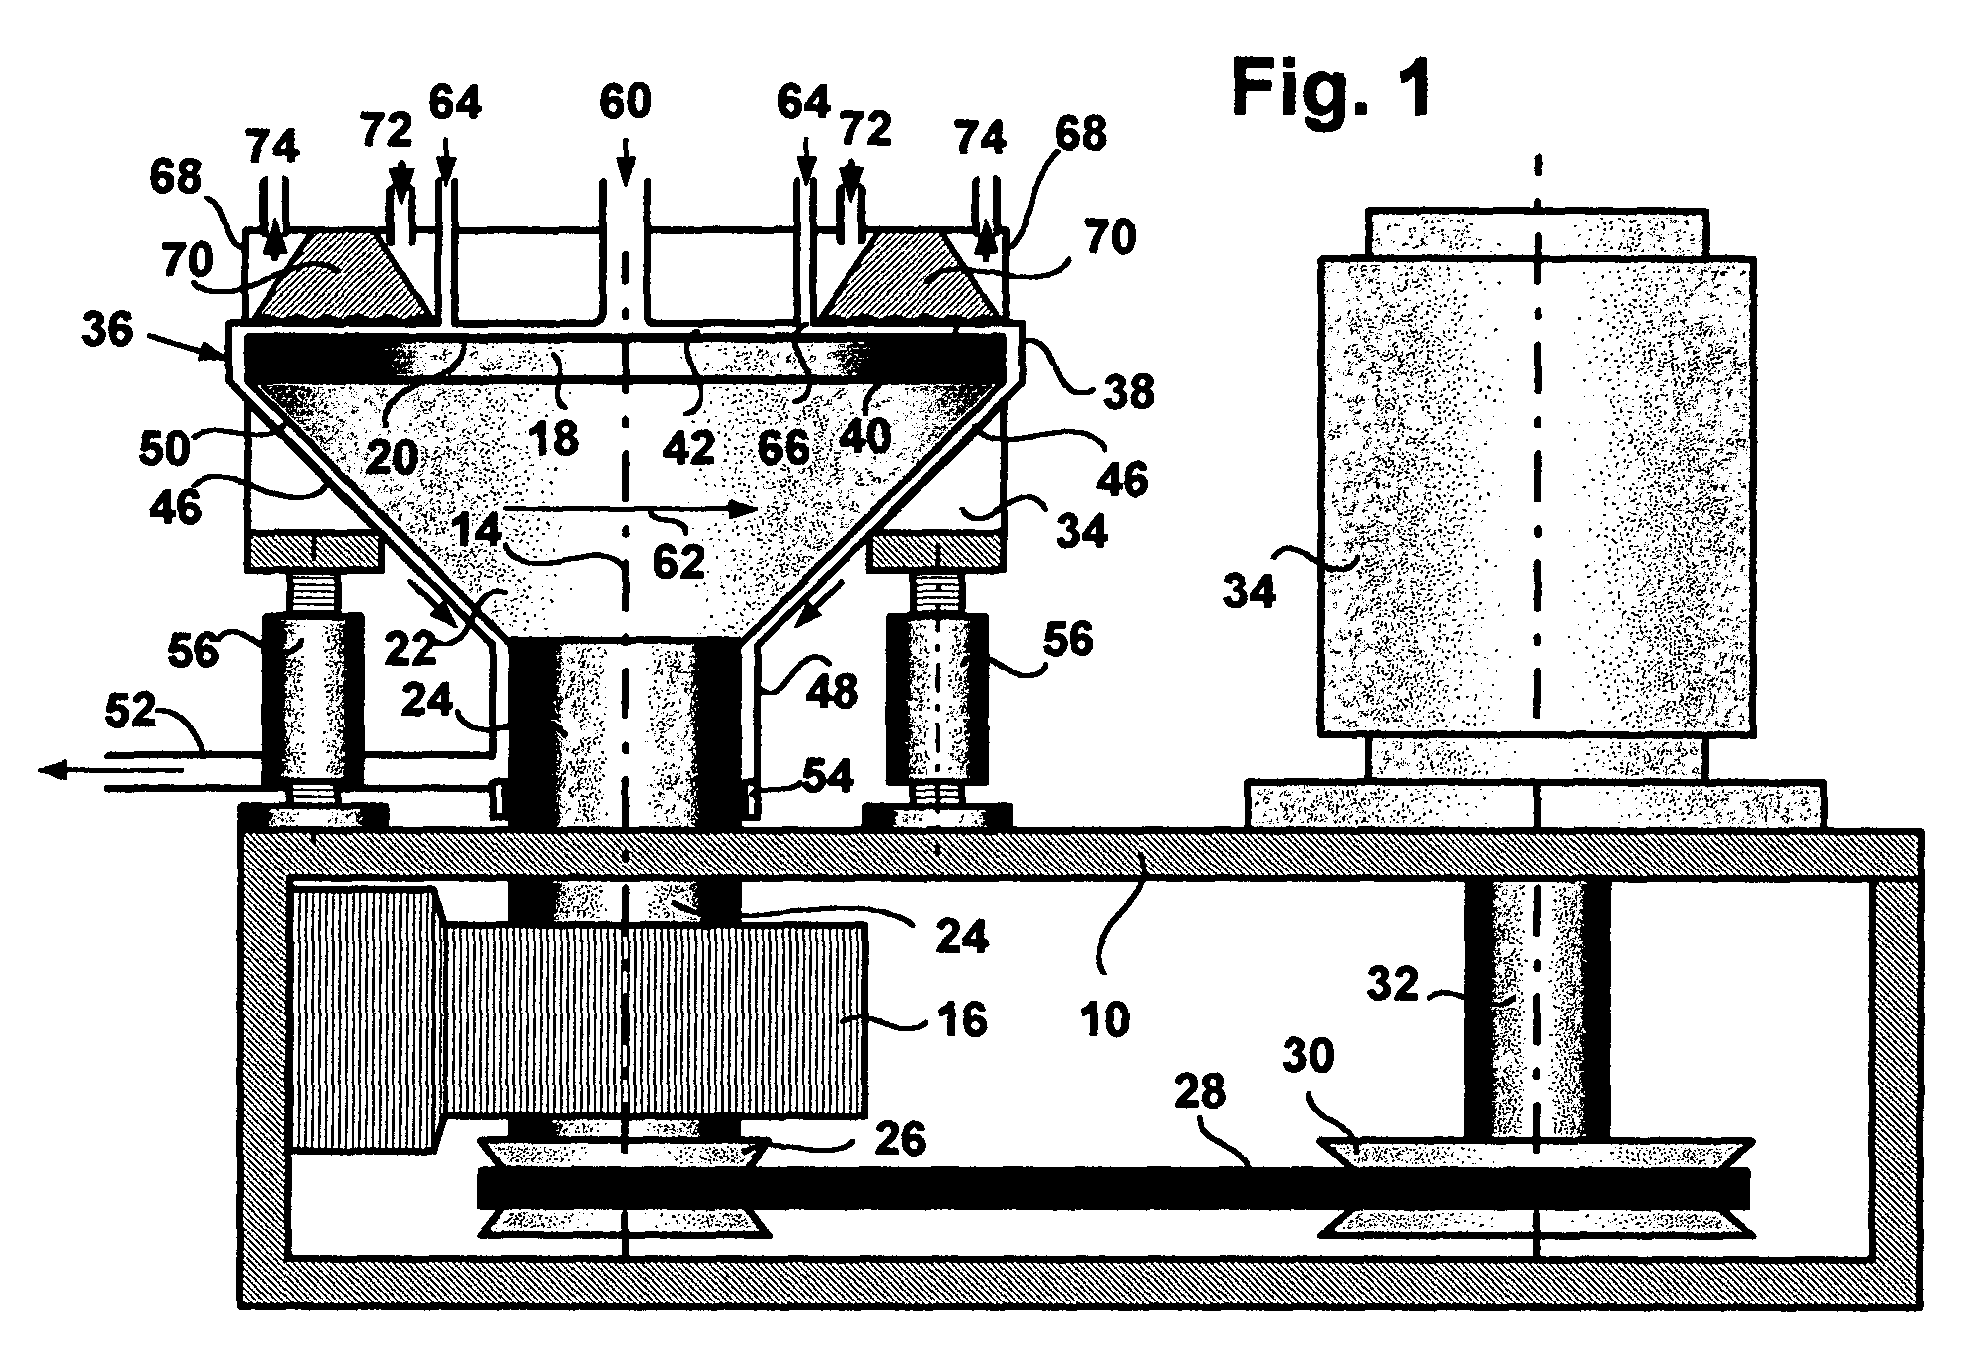 Methods of operating surface reactors and reactors employing such methods